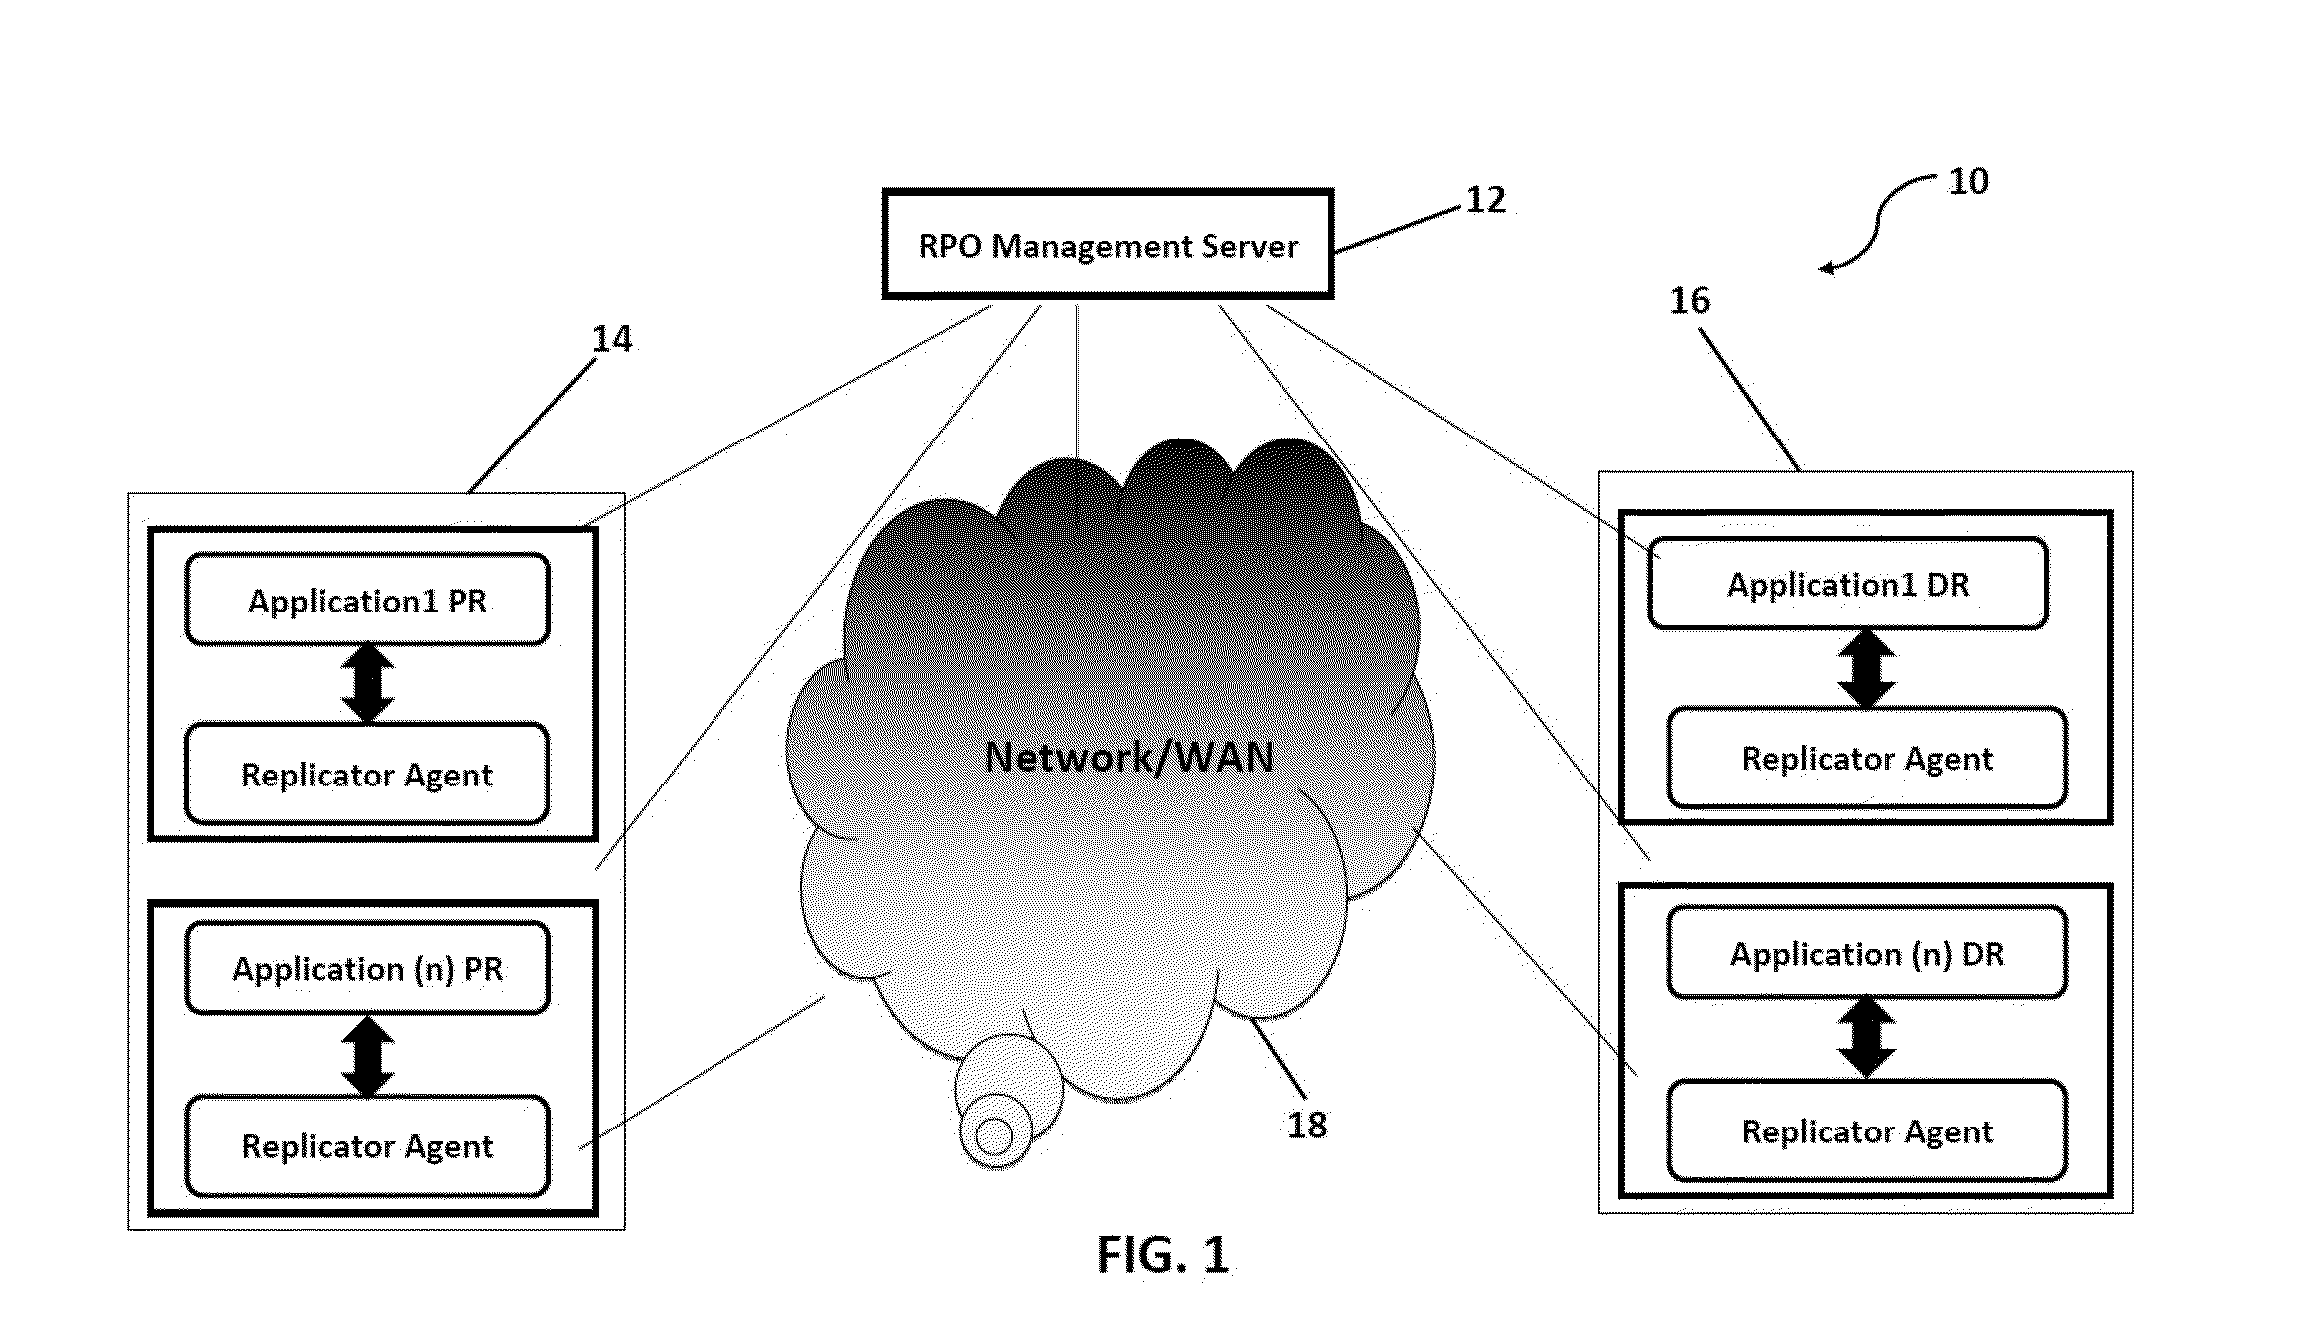 System and method to proactively maintain a consistent recovery point objective (RPO) across data centers